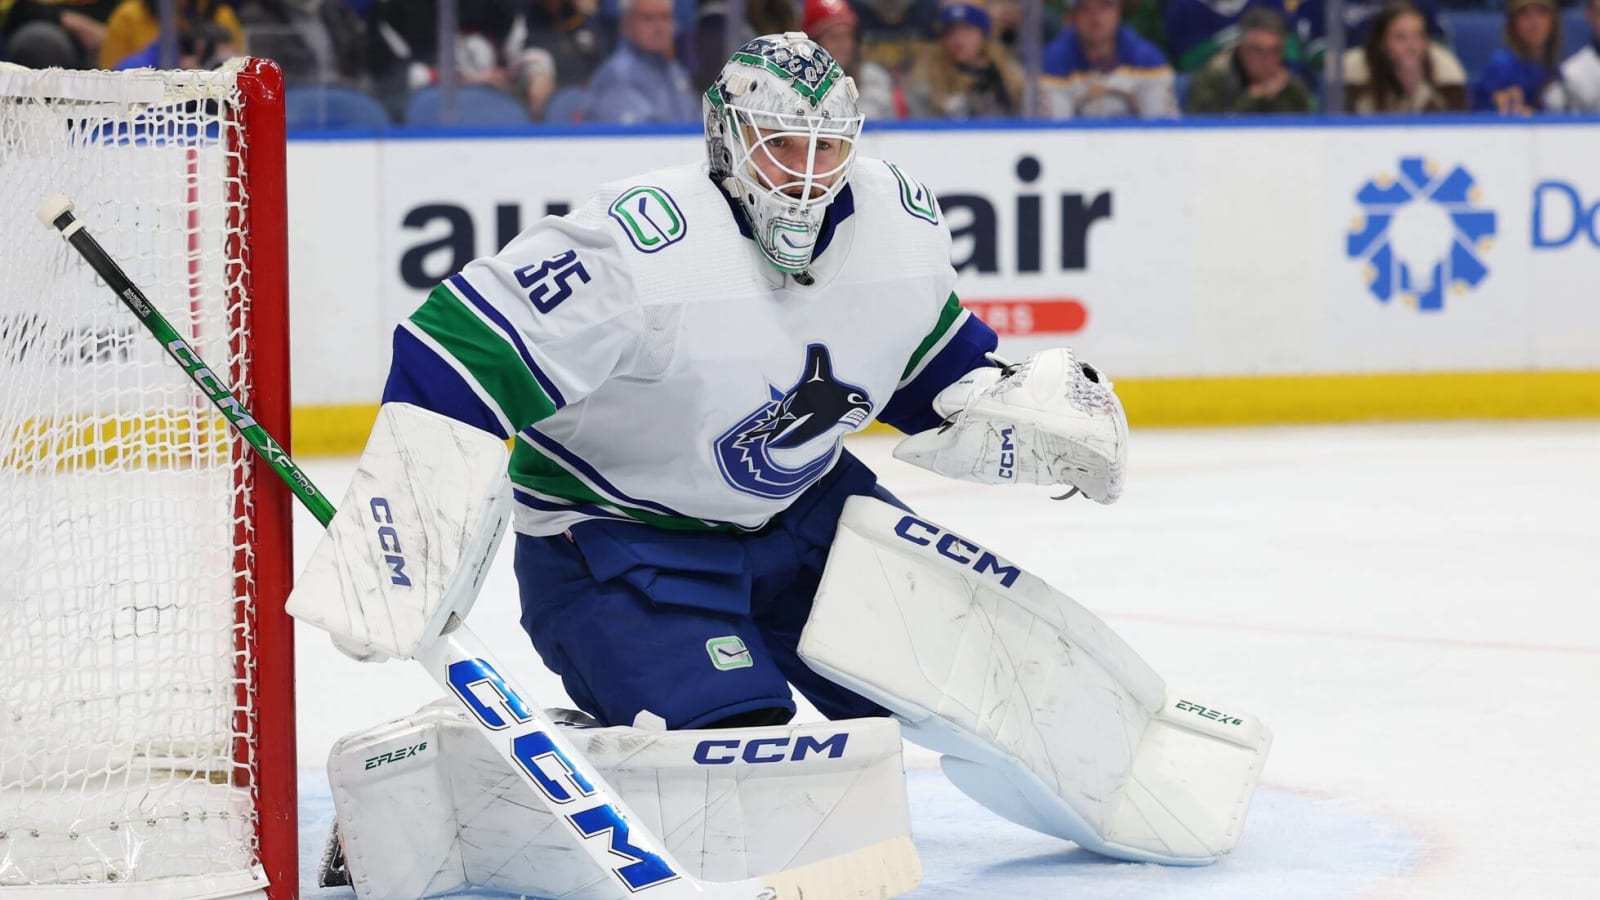 Canucks coach Rick Tocchet says Thatcher Demko won’t play in Game 7